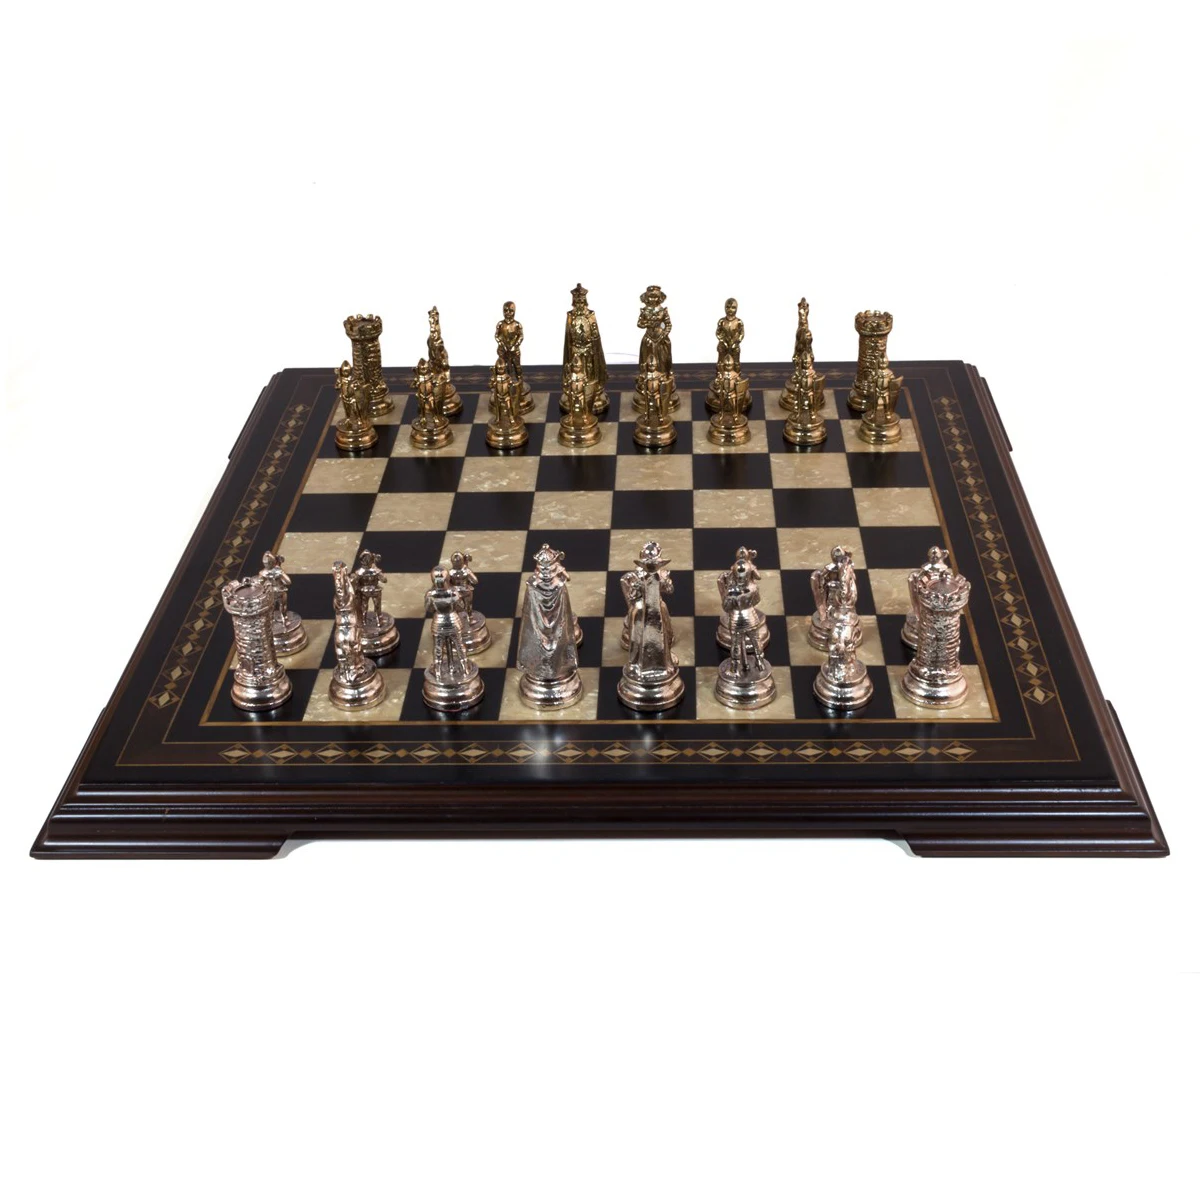 22.5'' Flat Footed Black Chessboard - Solid Beech Wood Mosaic Engraved Chess Board Game Gift Items Deck Box Checkers Шахматы the art of chess шахматы